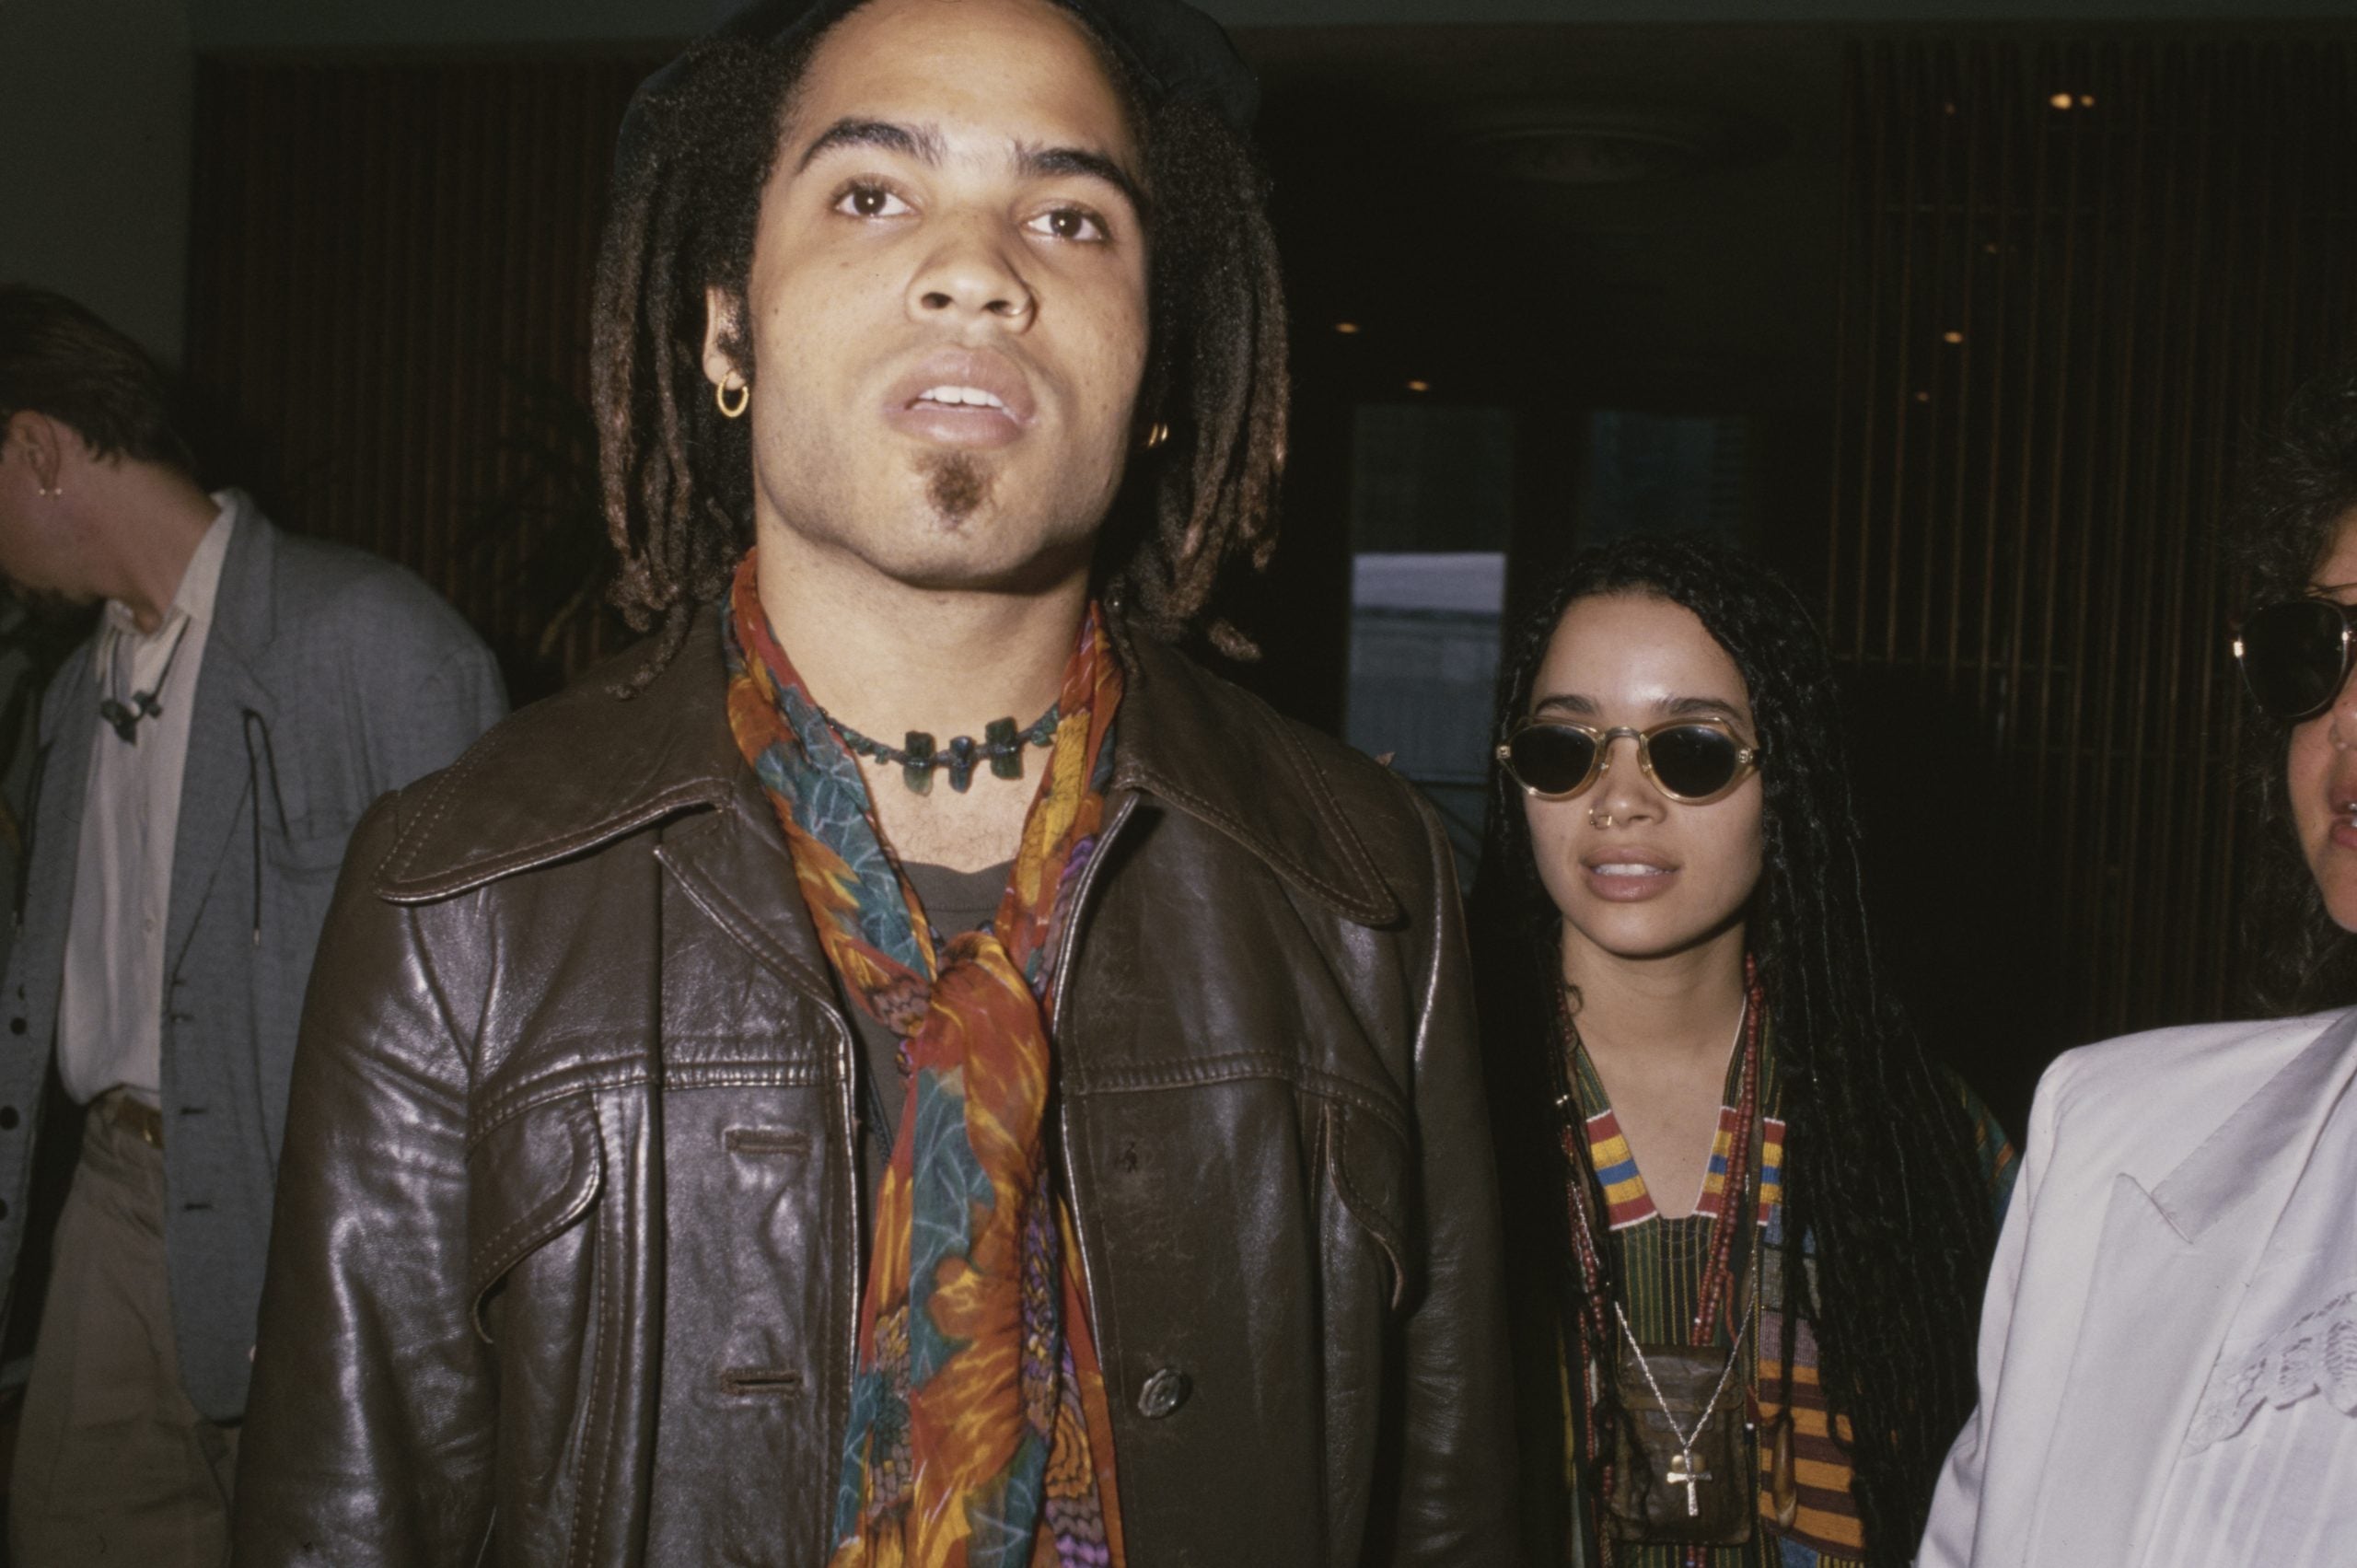 The Best Photos Of Lenny Kravitz And Lisa Bonet Over The Years